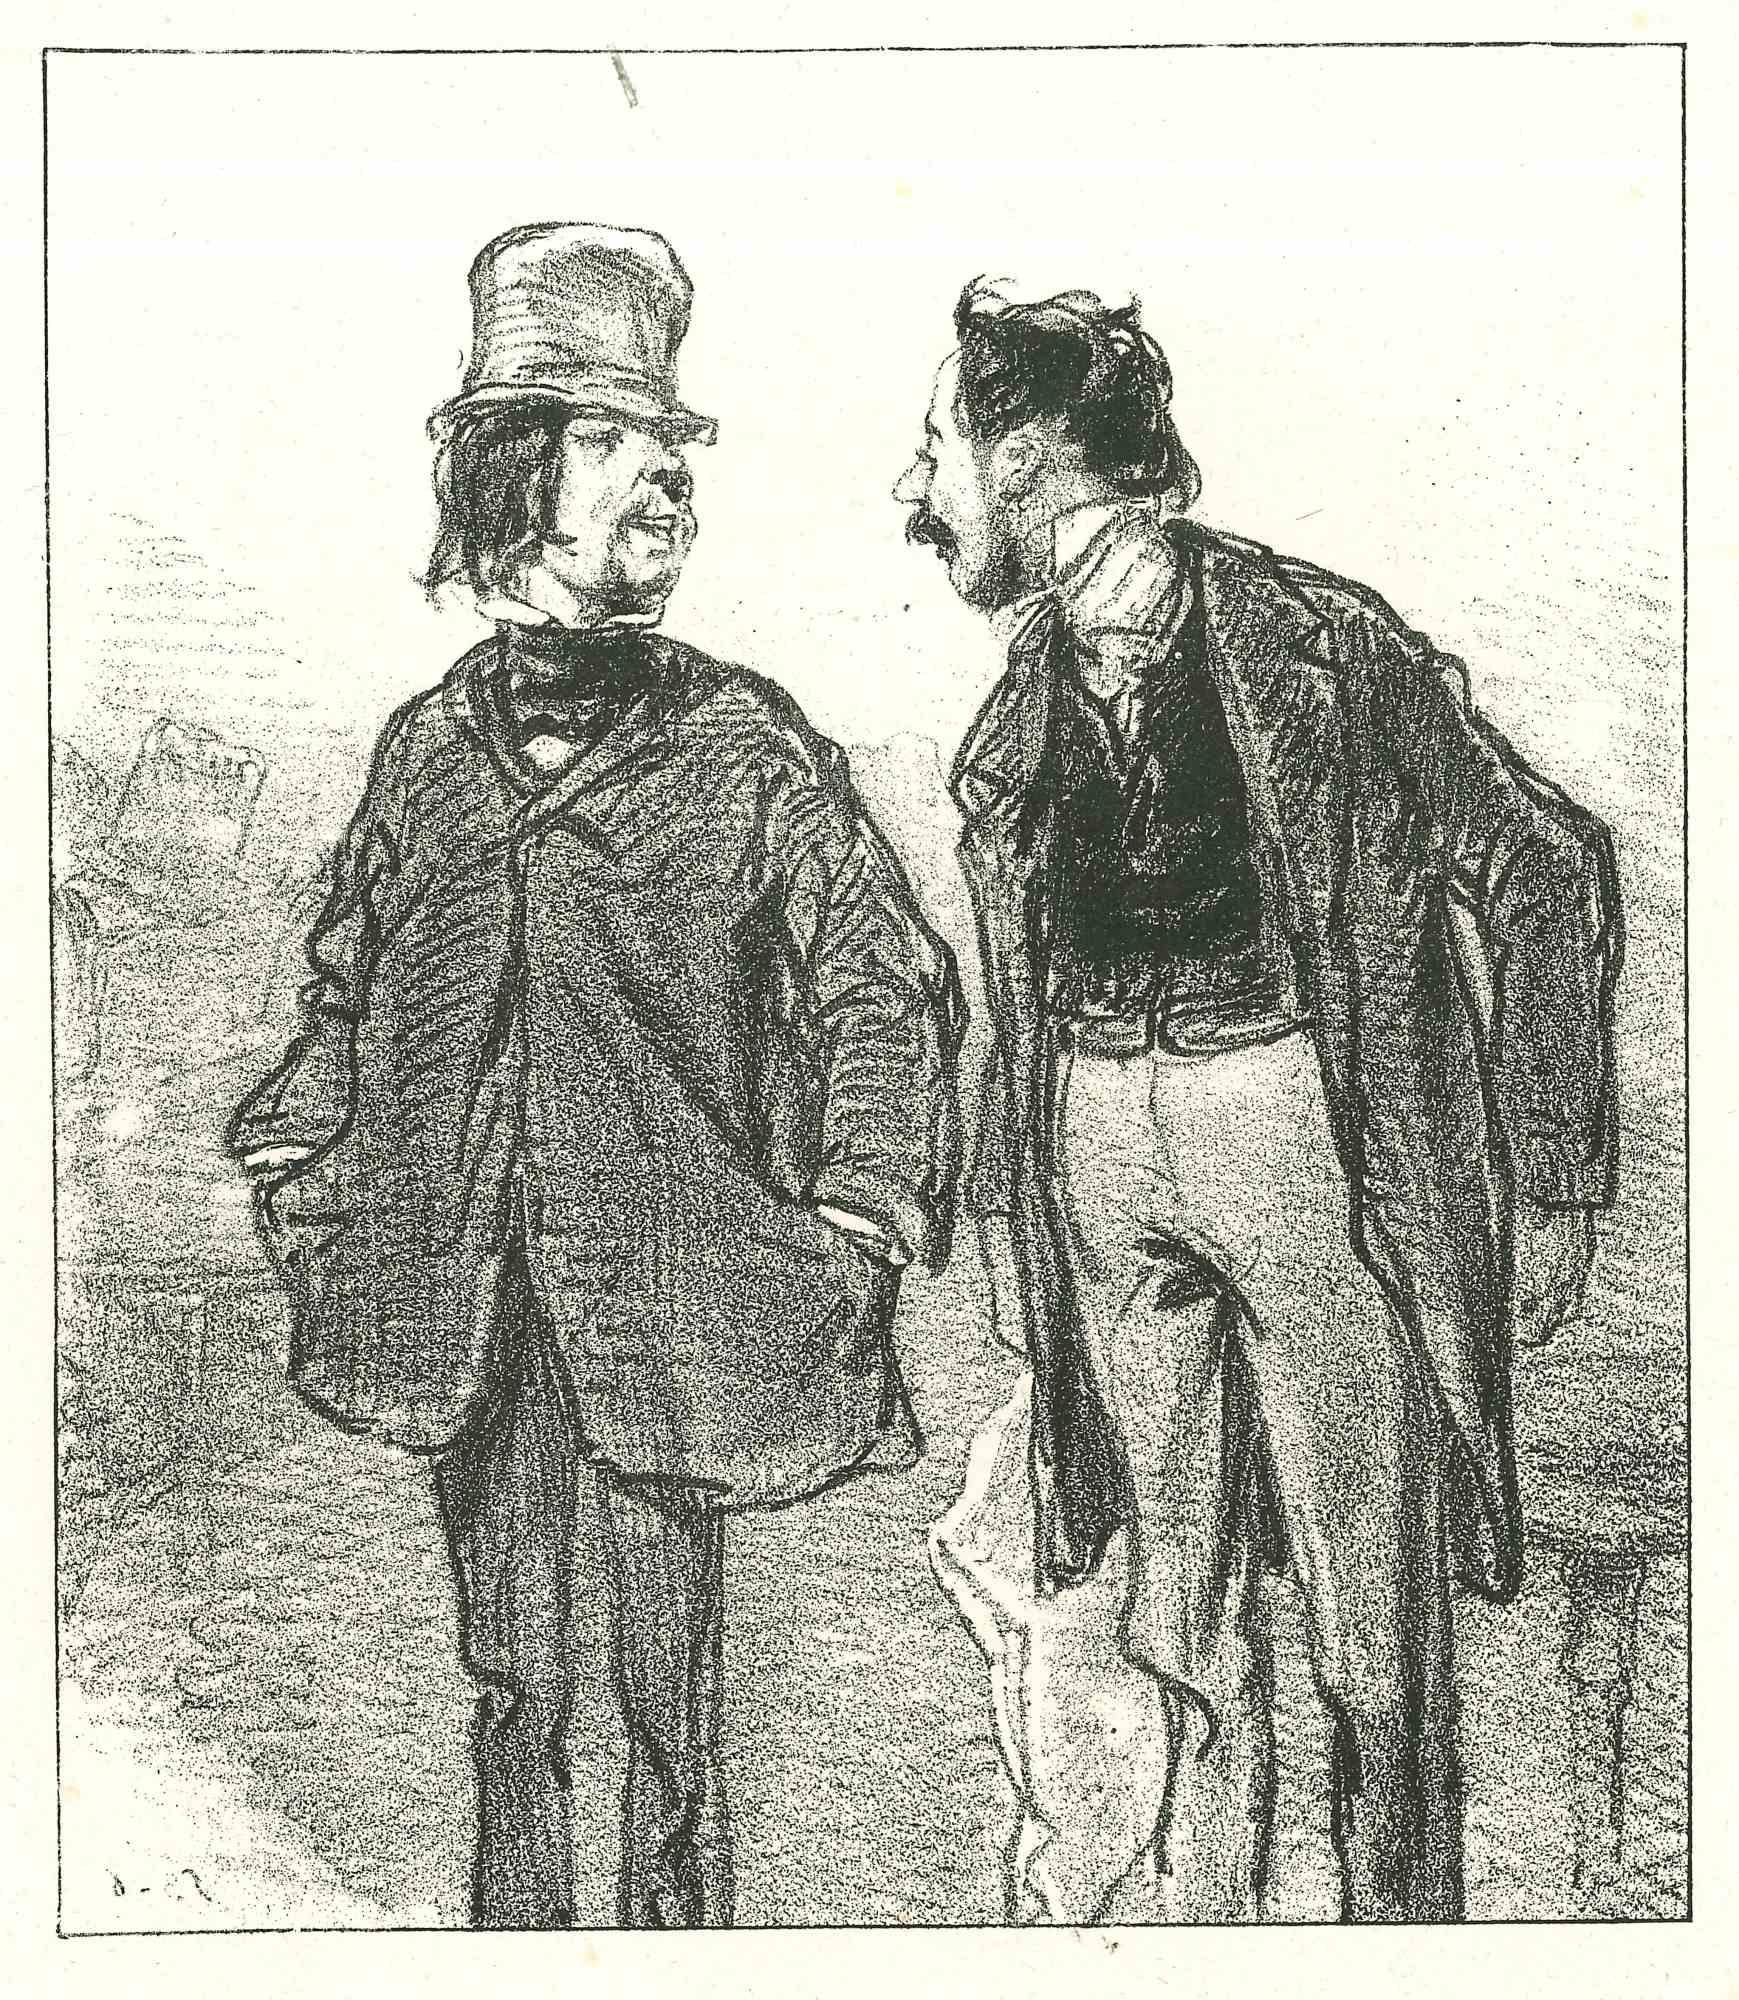 The conversation is an original lithograph artwork on ivory-colored paper, realized by the French draftsman Paul Gavarni (after) (alias Guillaume Sulpice Chevalier Gavarni, 1804-1866) in Paris, 1881, in the collection of Illustrations for "La